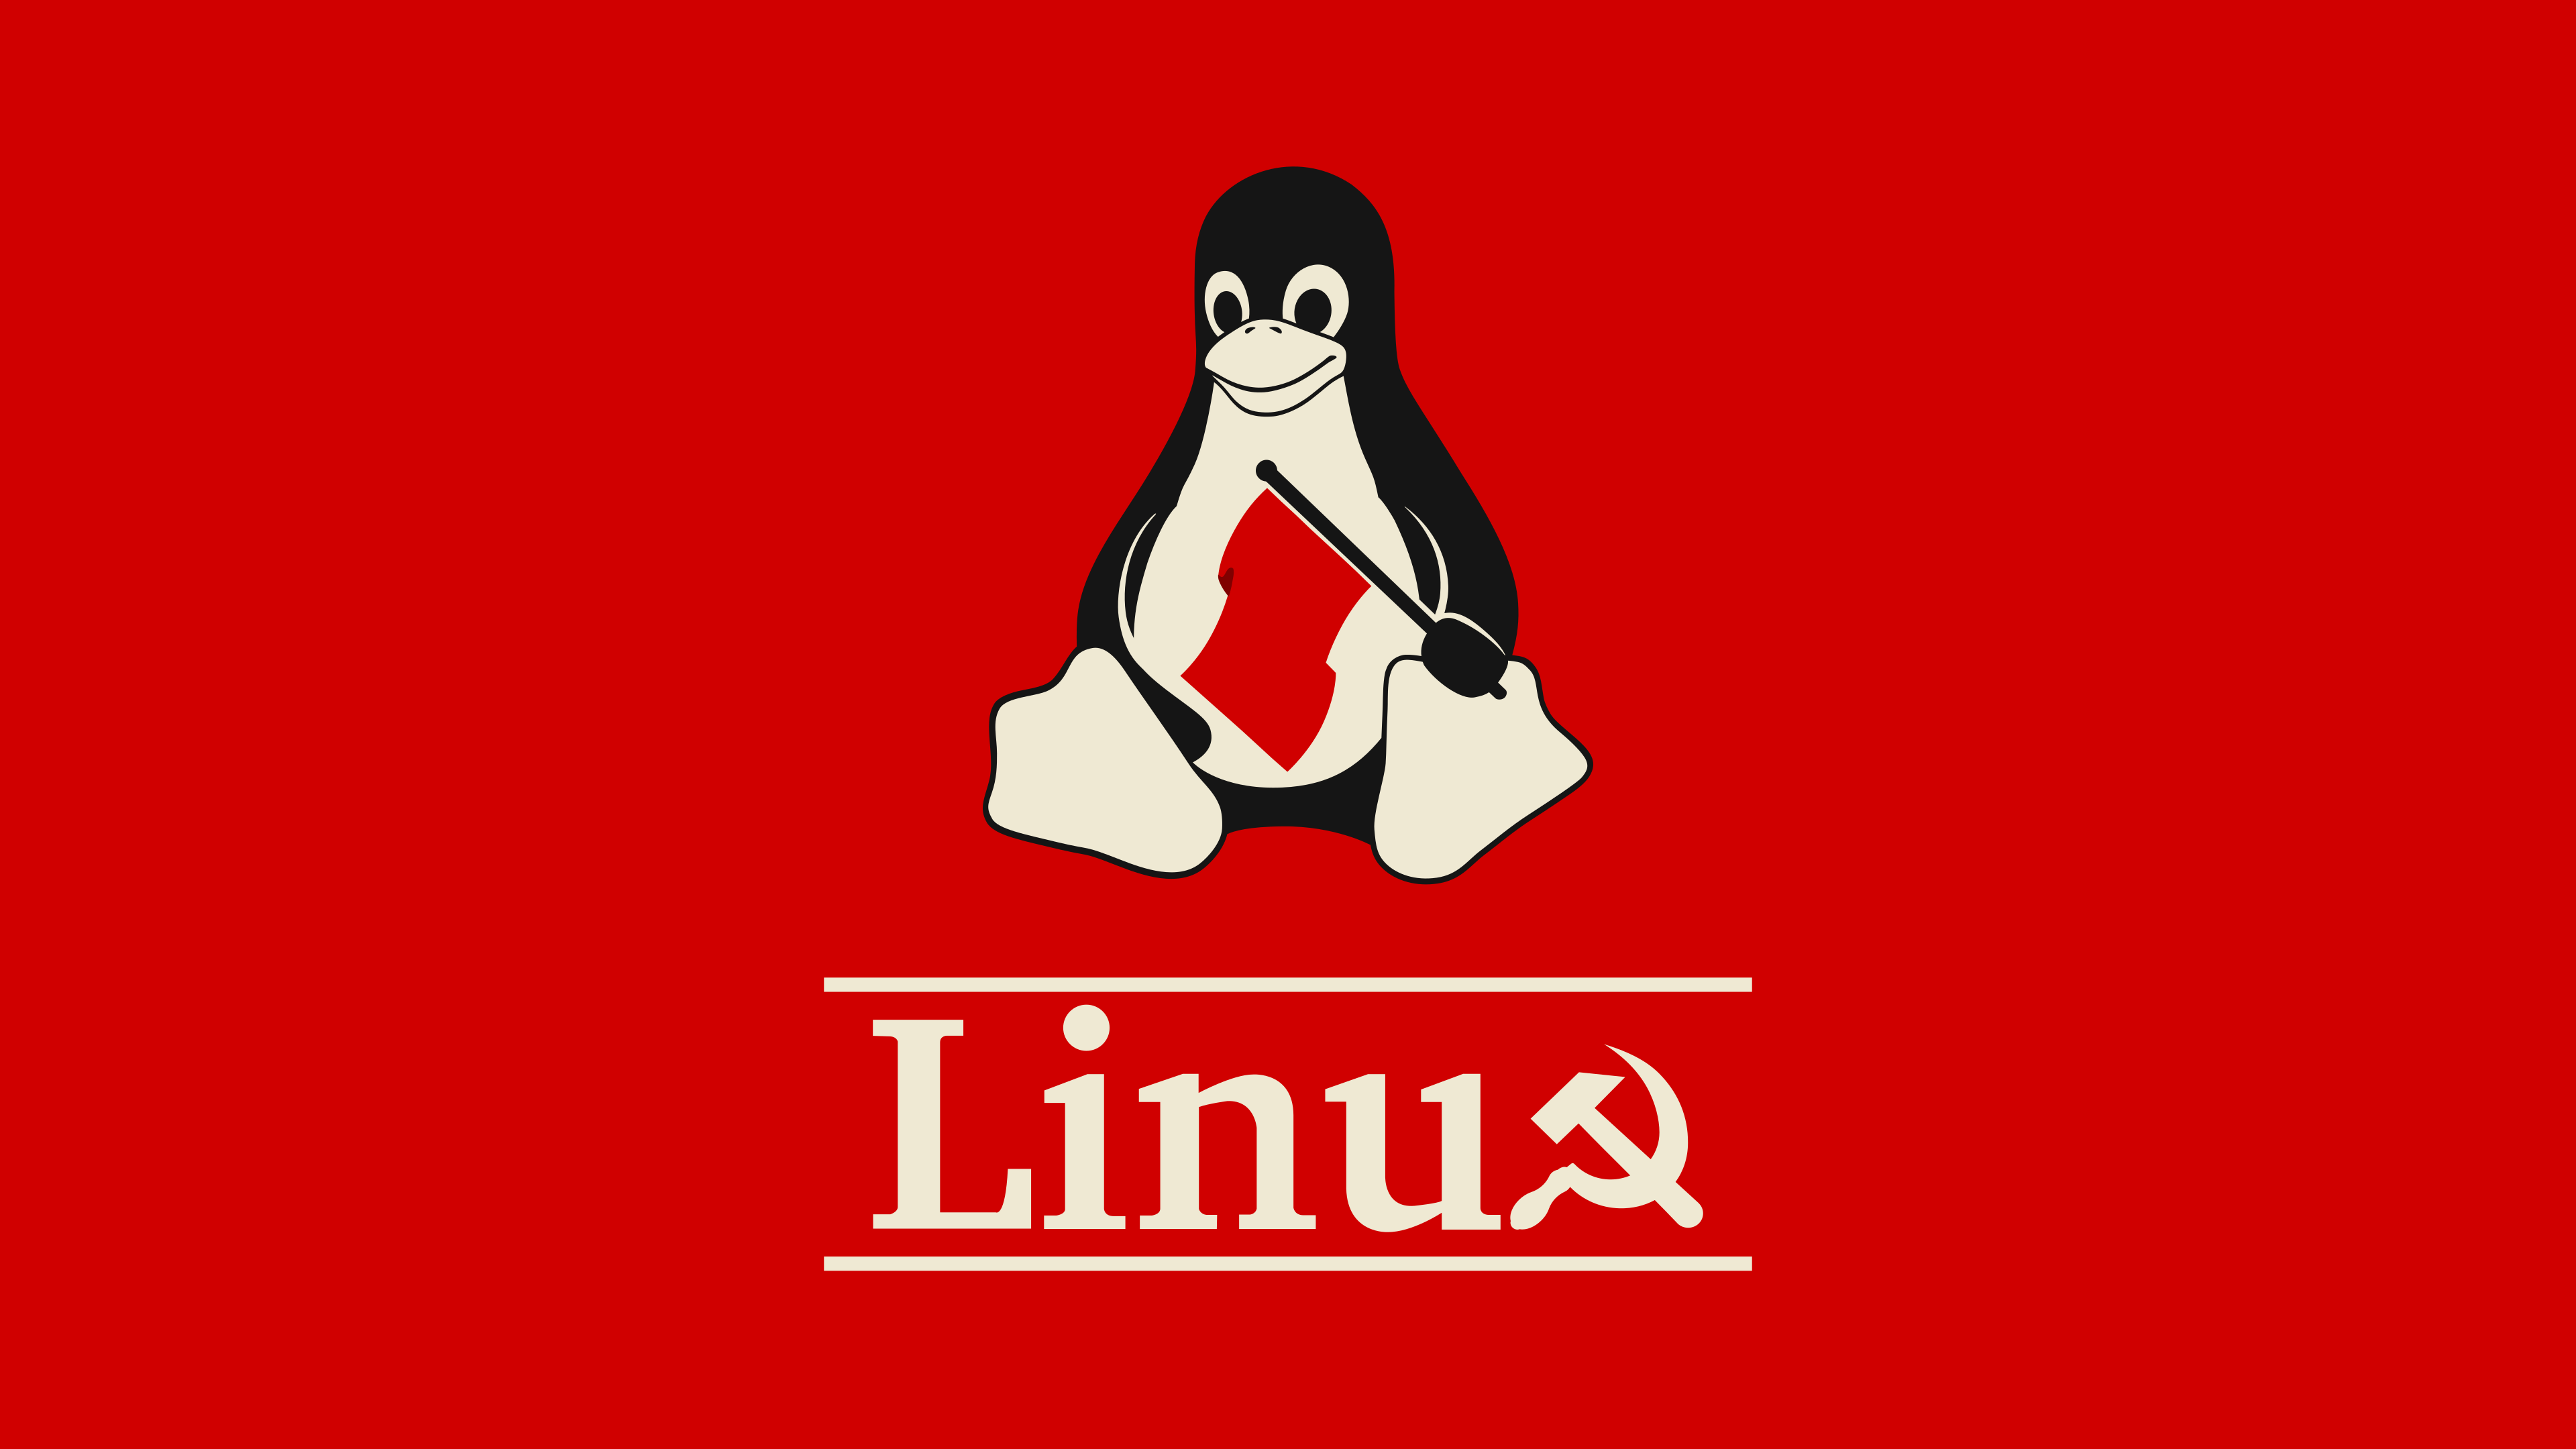 Linux Tux Socialism FoxyRiot Red Hammer And Sickle Humor Red Background 3840x2160